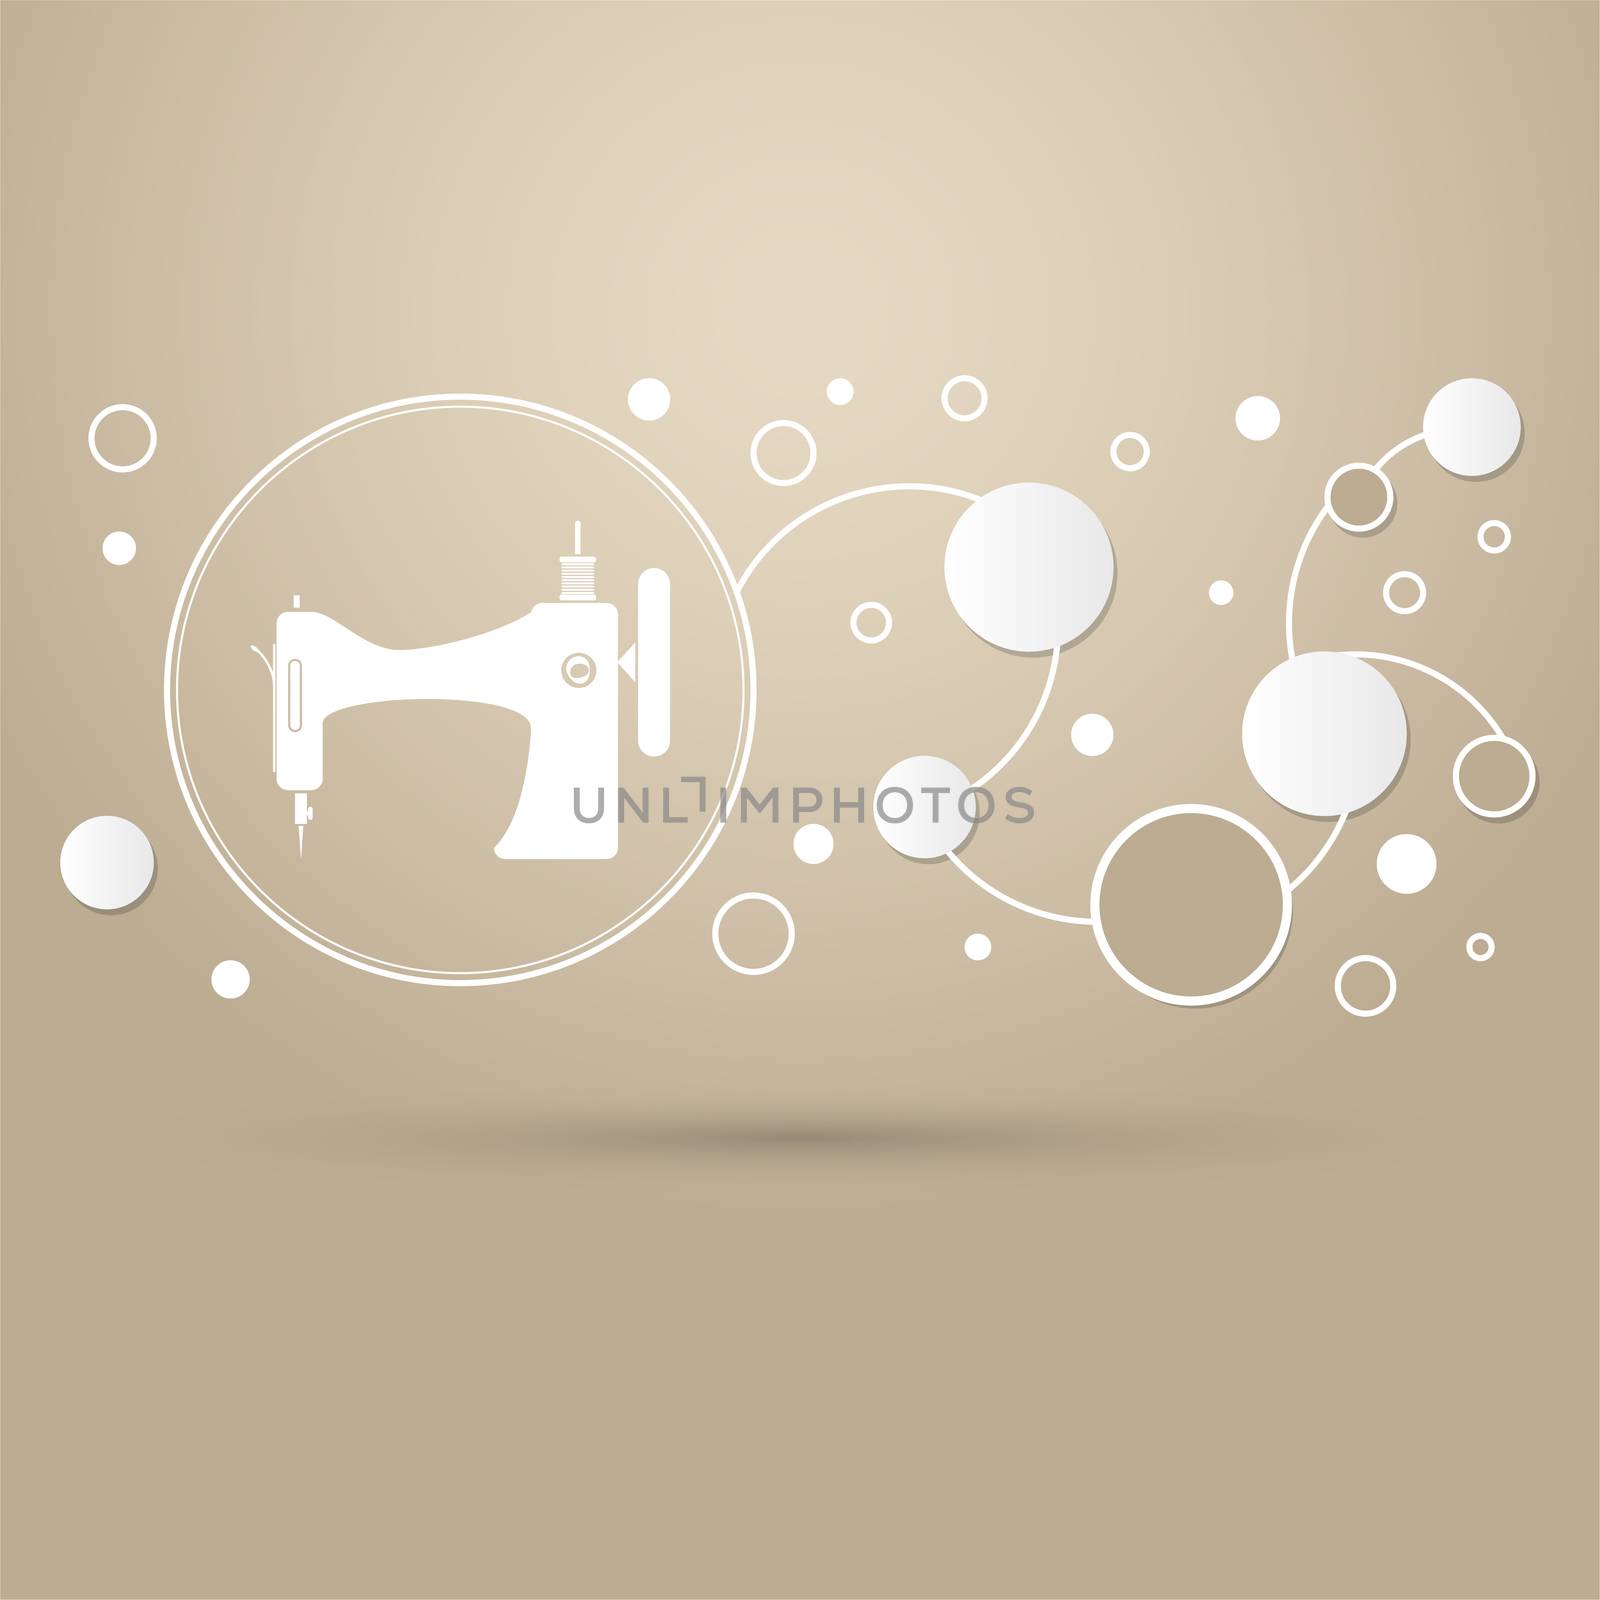 Sewing Machine icon on a brown background with elegant style and modern design infographic.  by Adamchuk